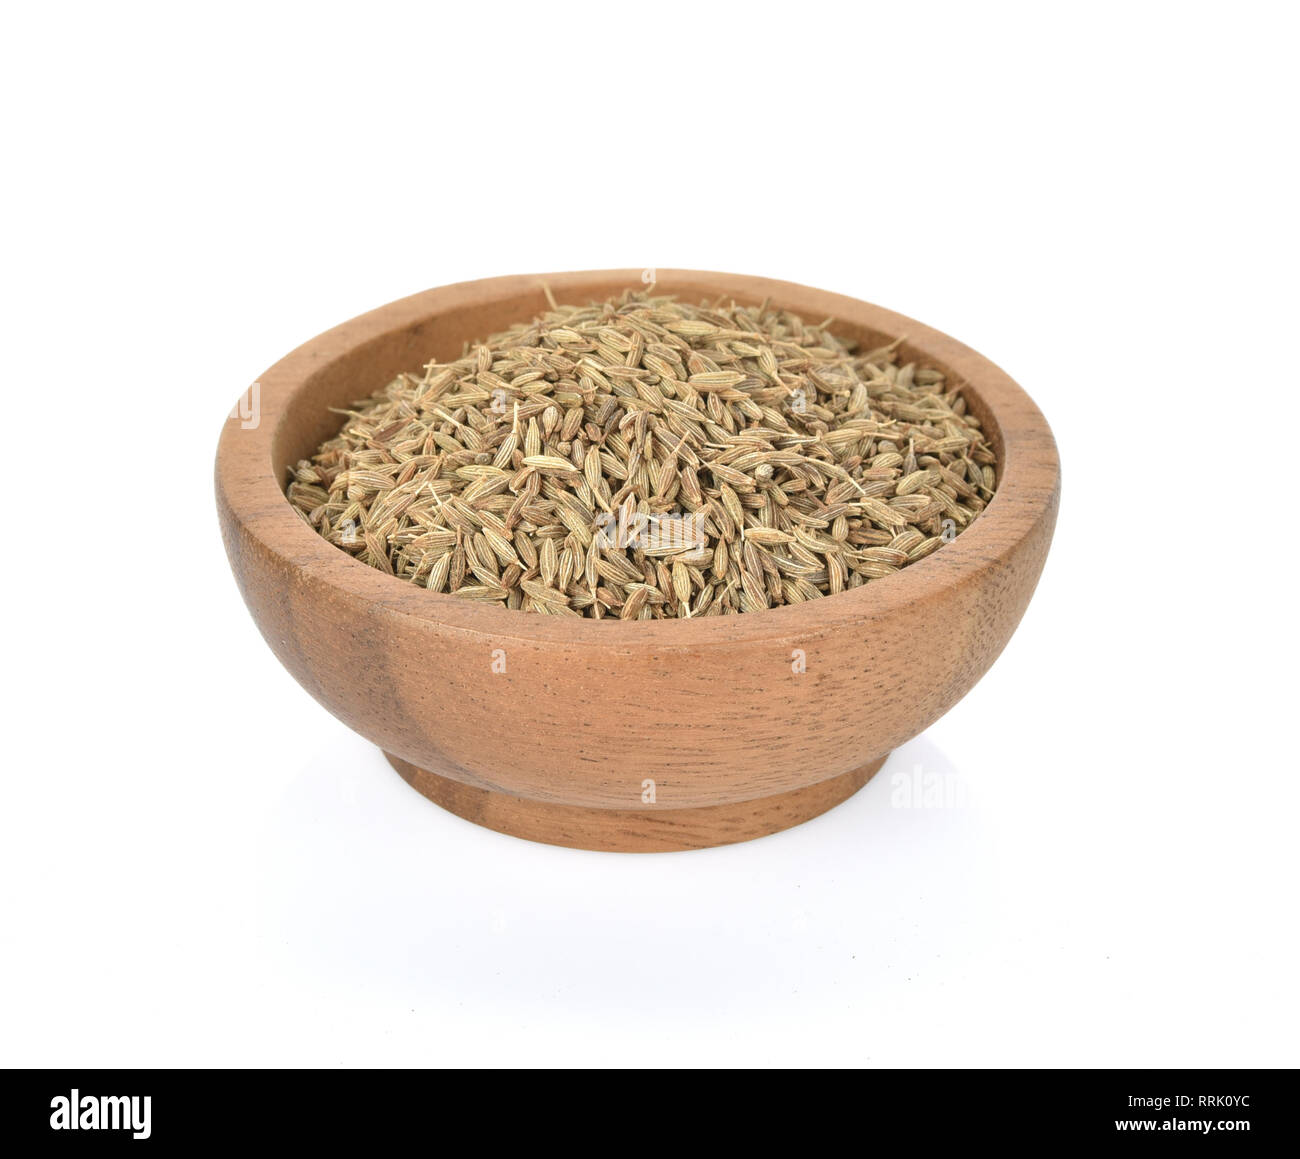 Caraway seeds in wooden bowl on white background Stock Photo